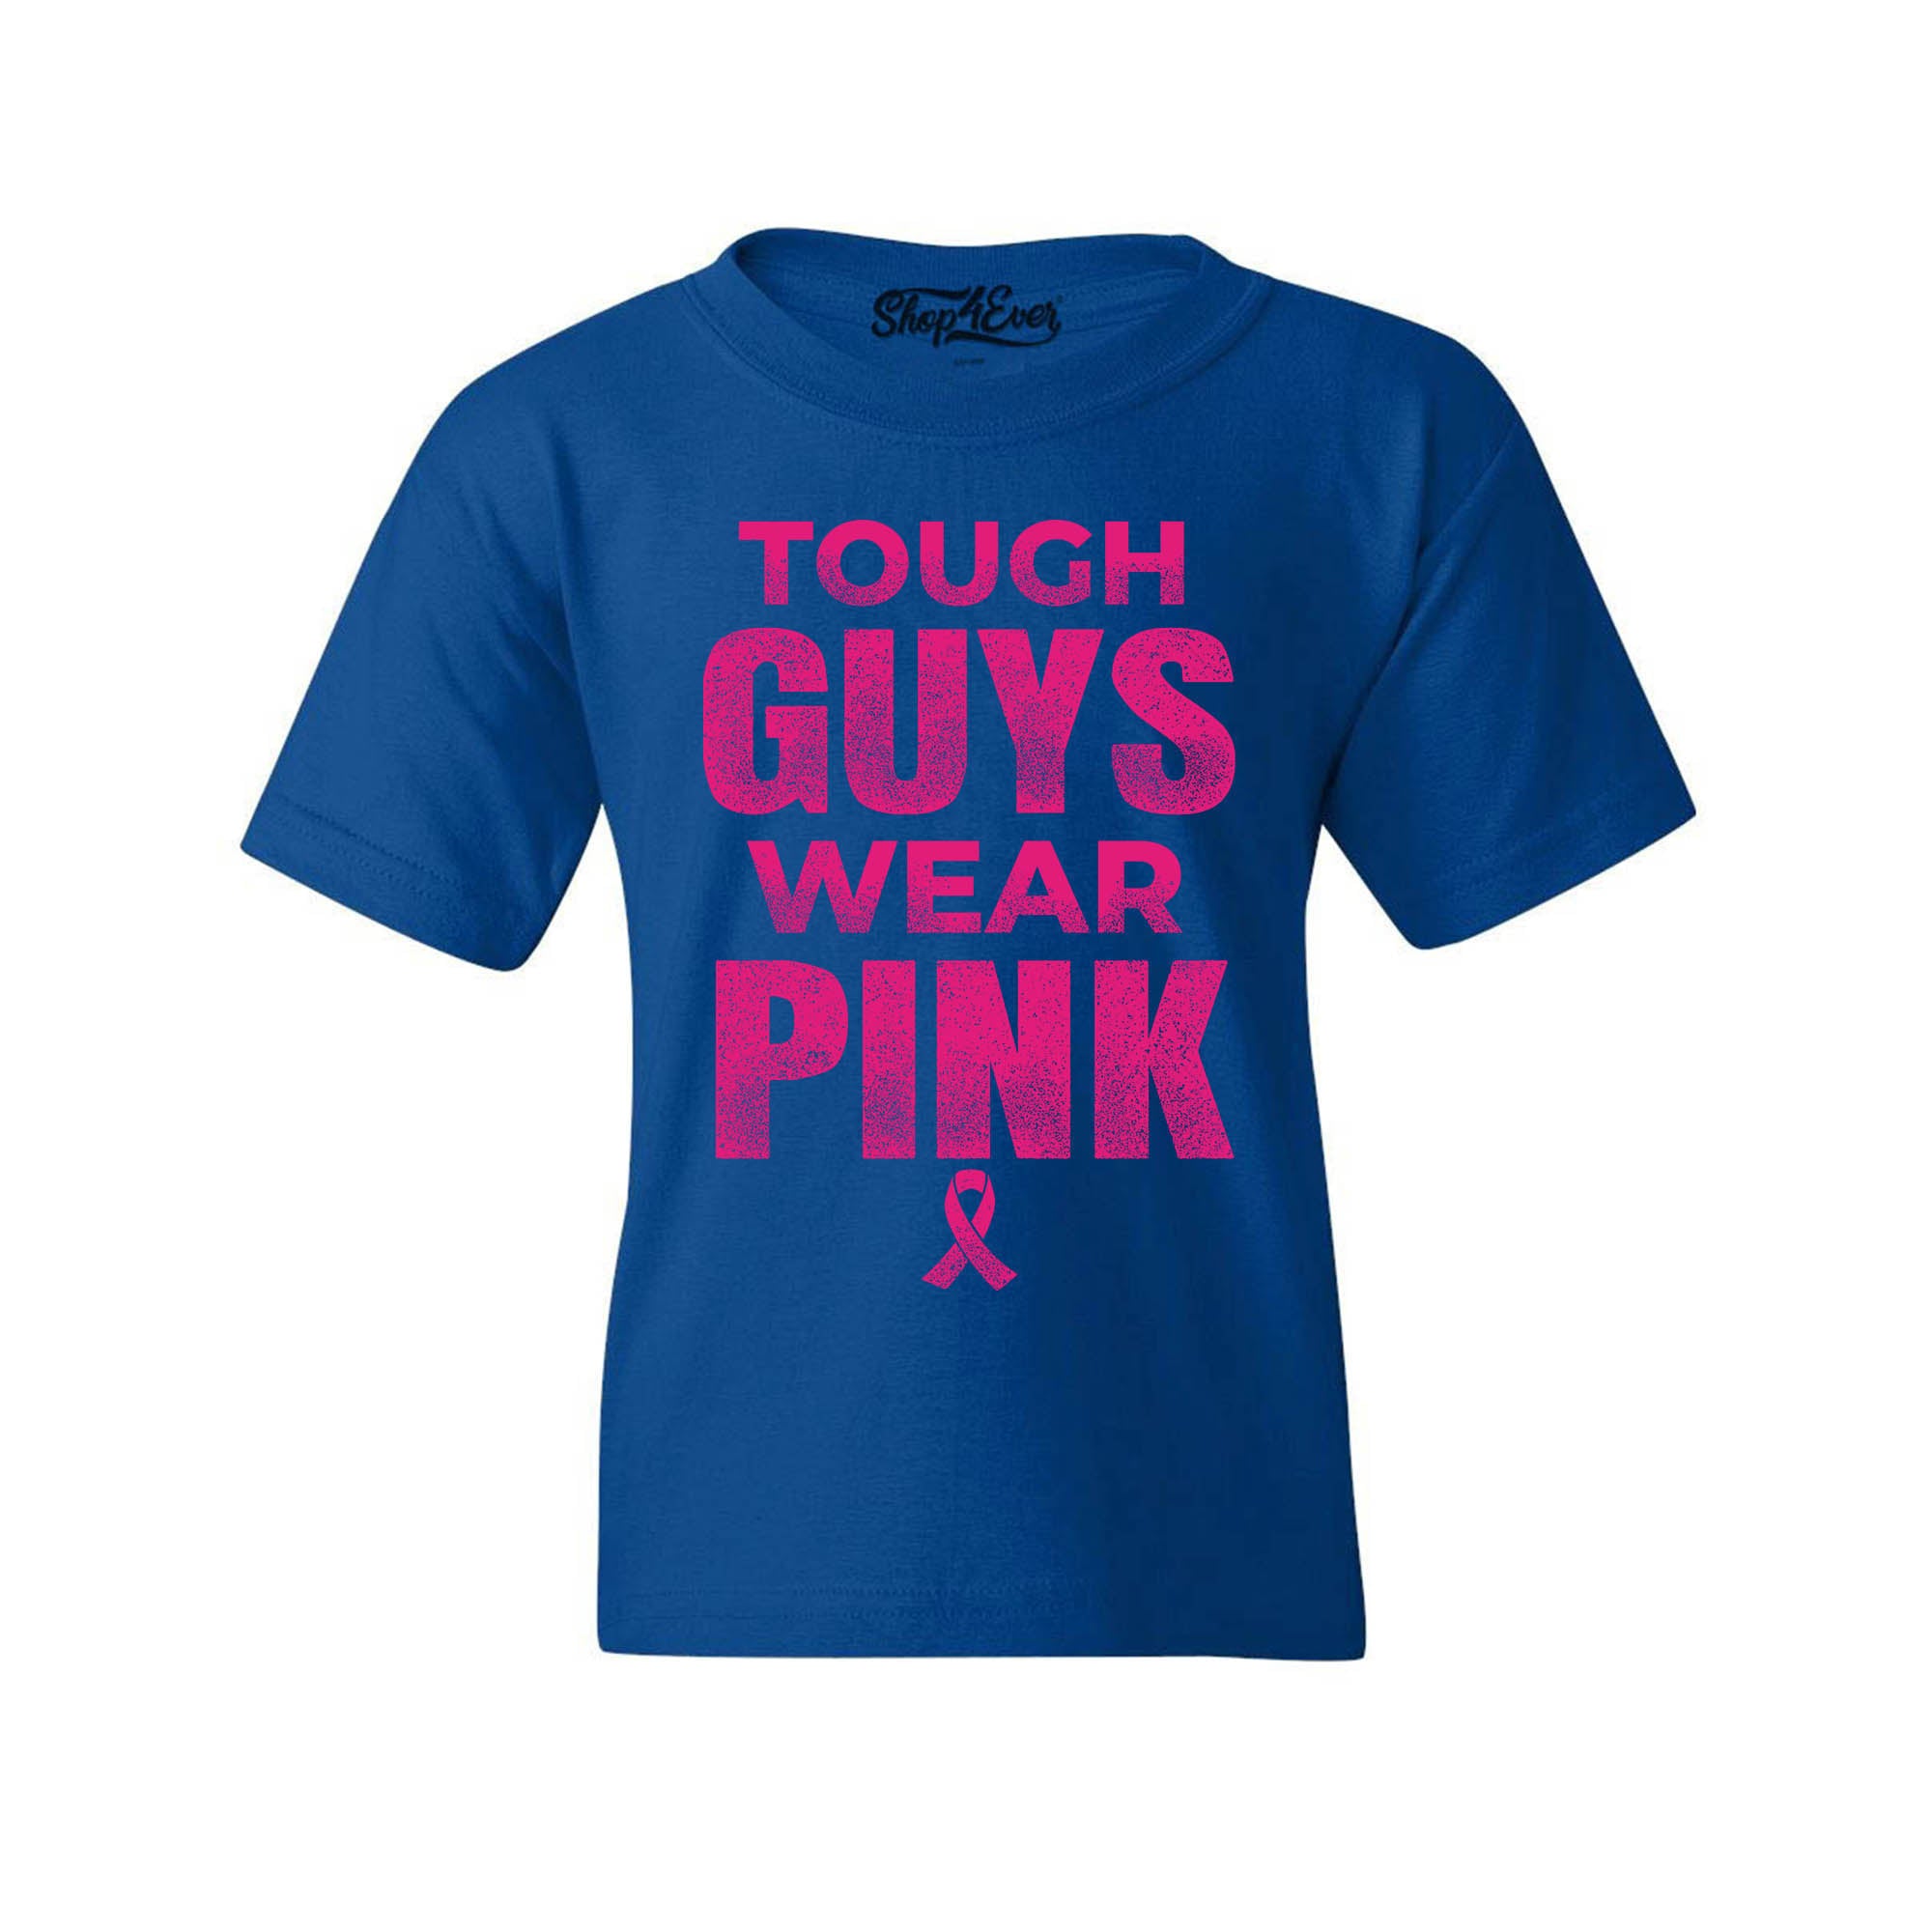 Tough Guys Wear Pink Youth's T-Shirt Breast Cancer Awareness Shirts